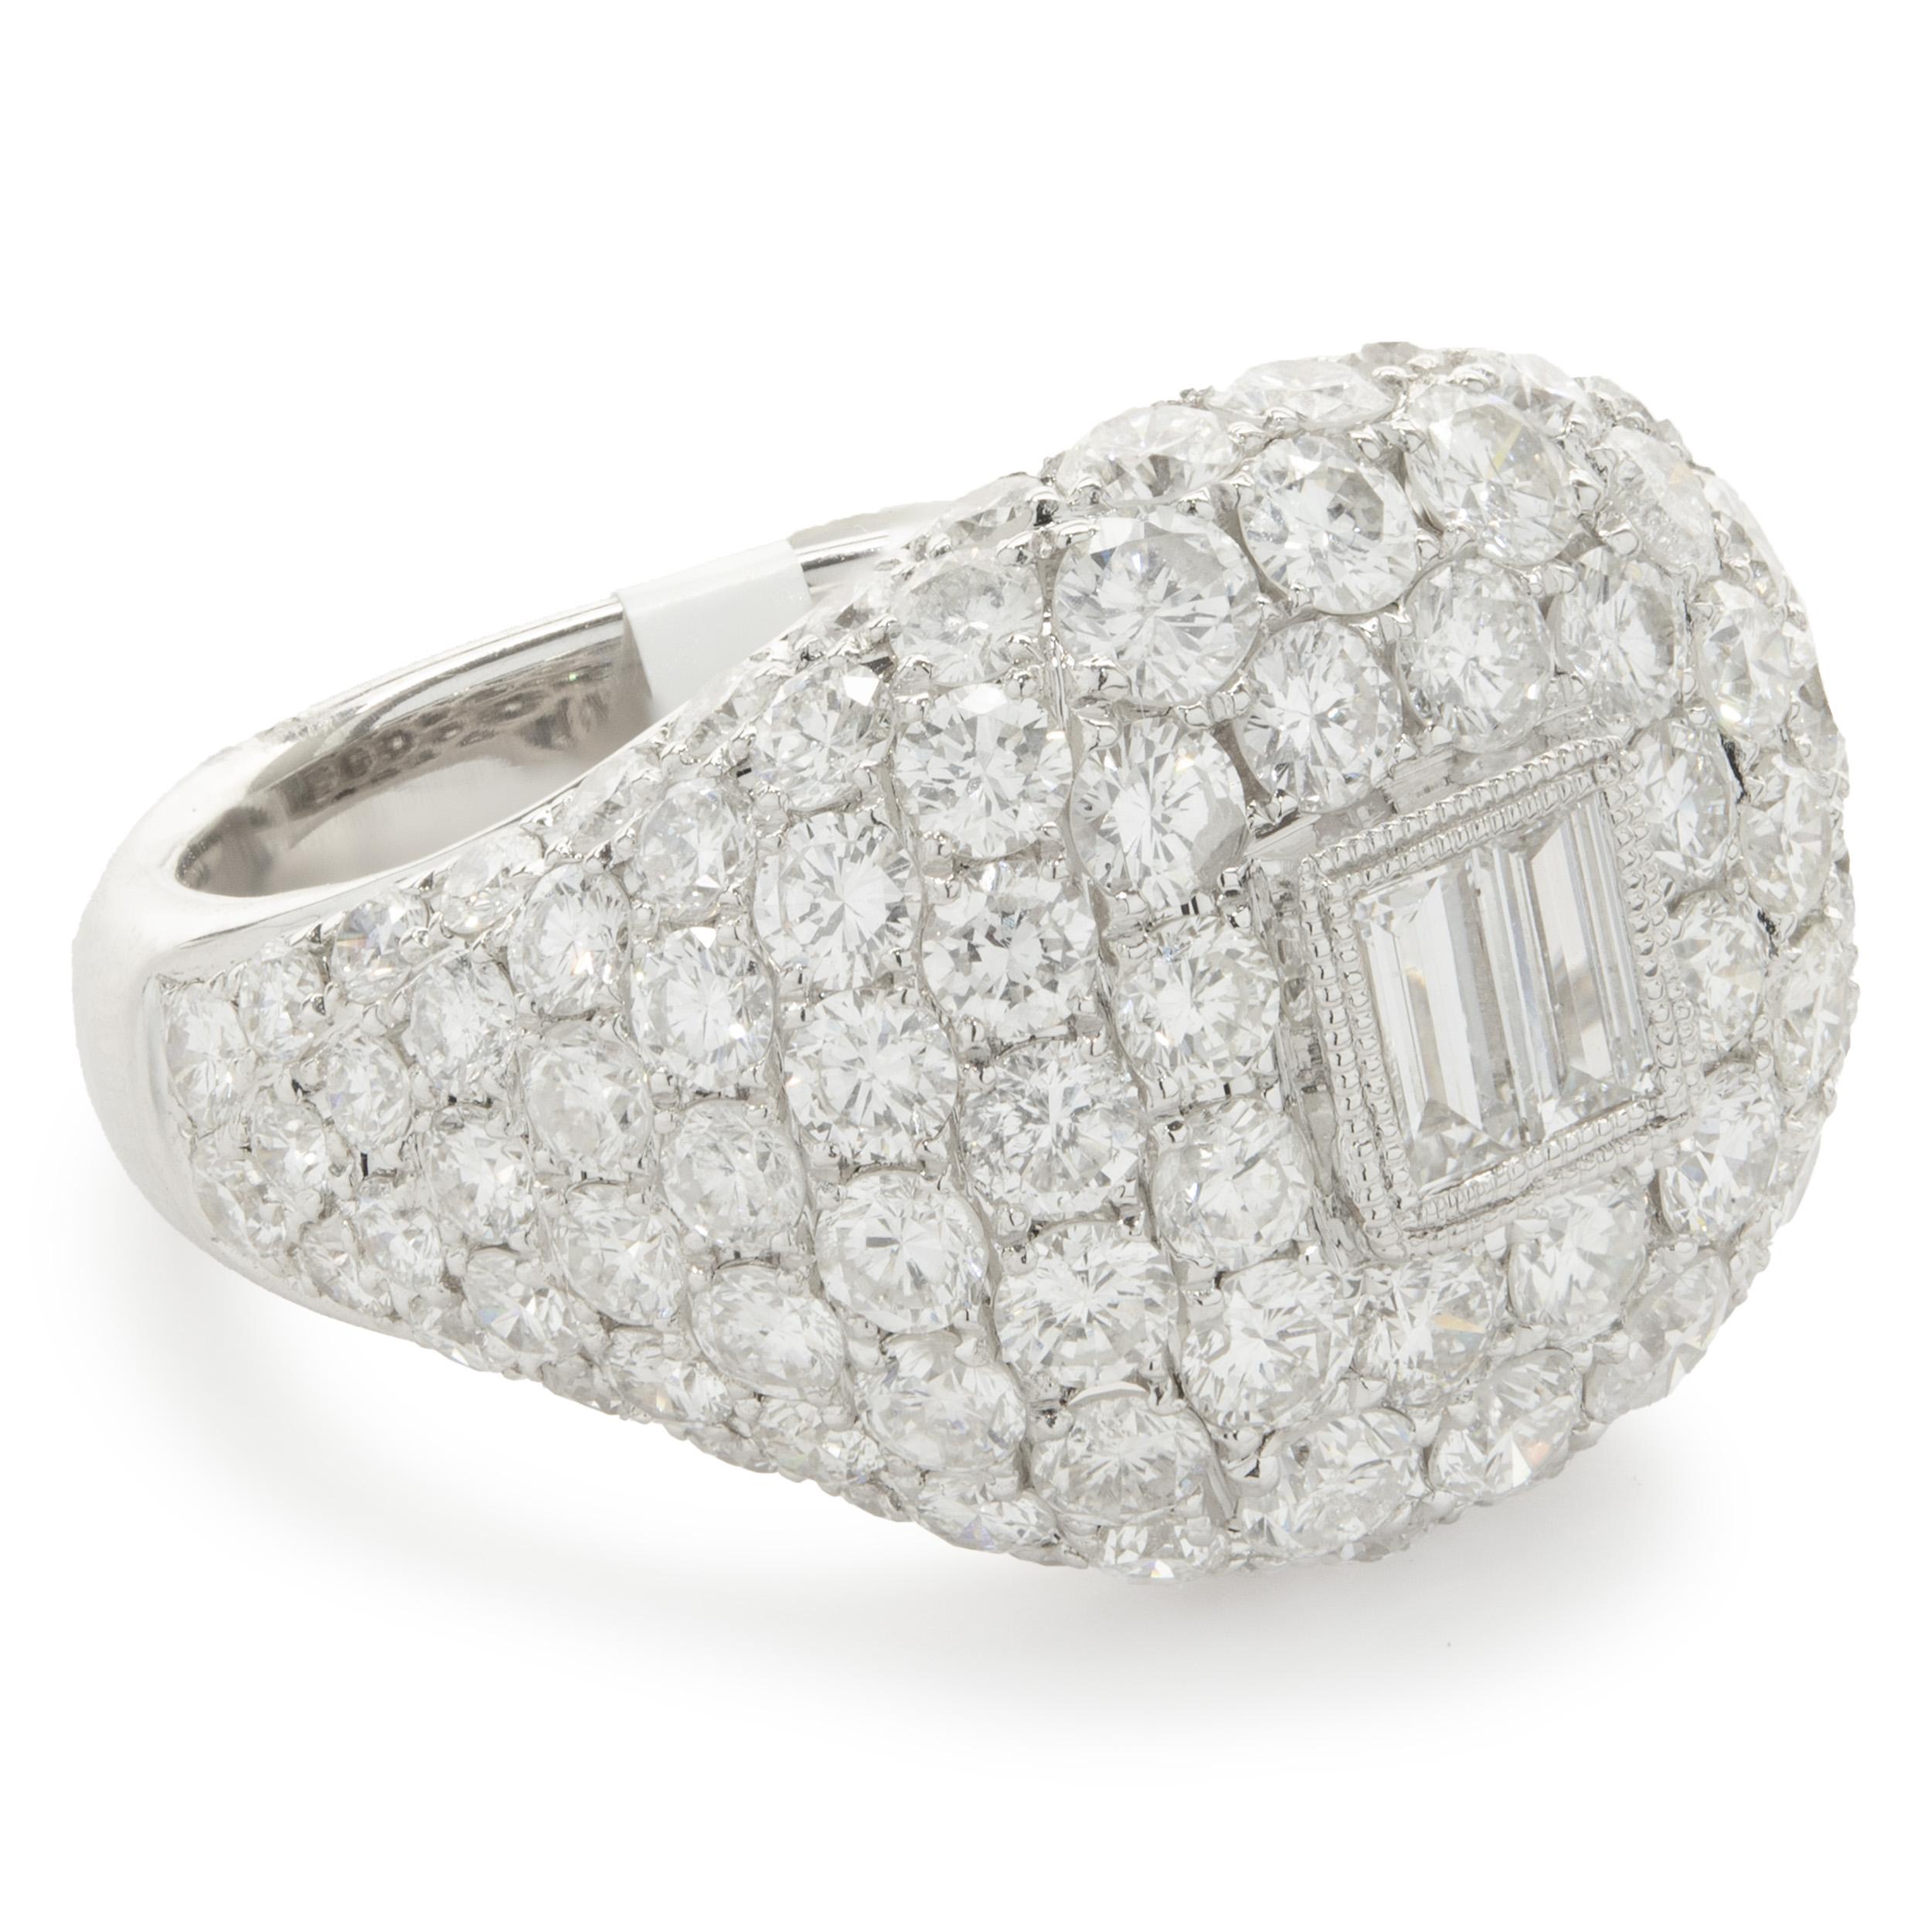 Designer: custom
Material: 18K white gold
Diamonds: 110 round brilliant cut = 3.52cttw
Color: G 
Clarity: VS2
Diamonds: 2 baguette cut = 0.27cttw
Color: G 
Clarity: VS2
Ring size: 6.5 (complimentary sizing available)
Weight:  7.14 grams